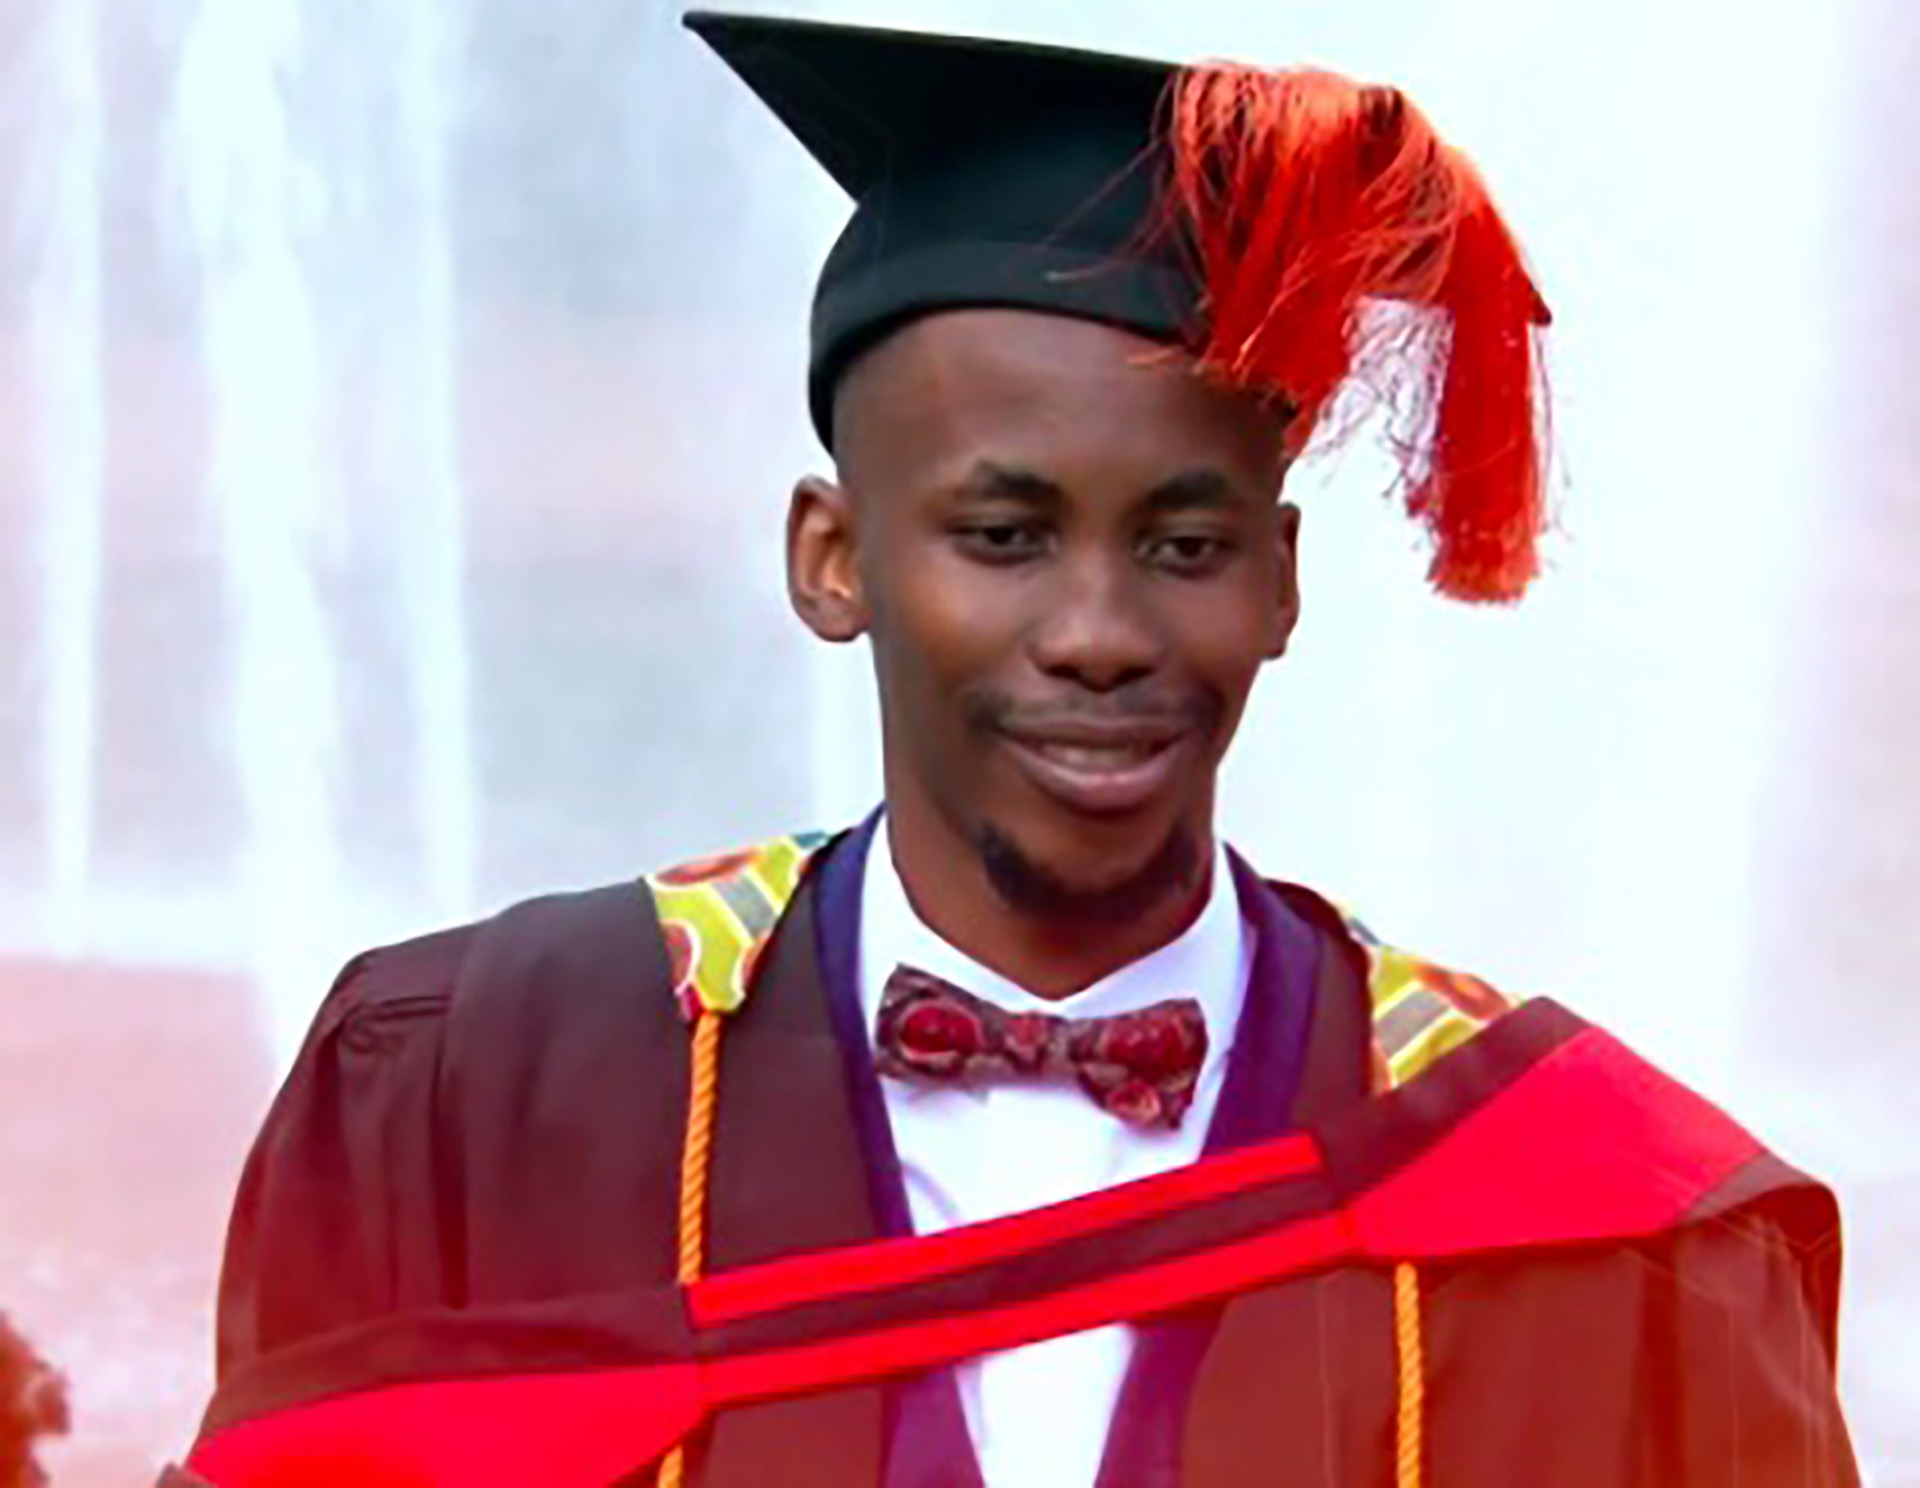 Student experiences on UJ virtual graduations, future opportunity to